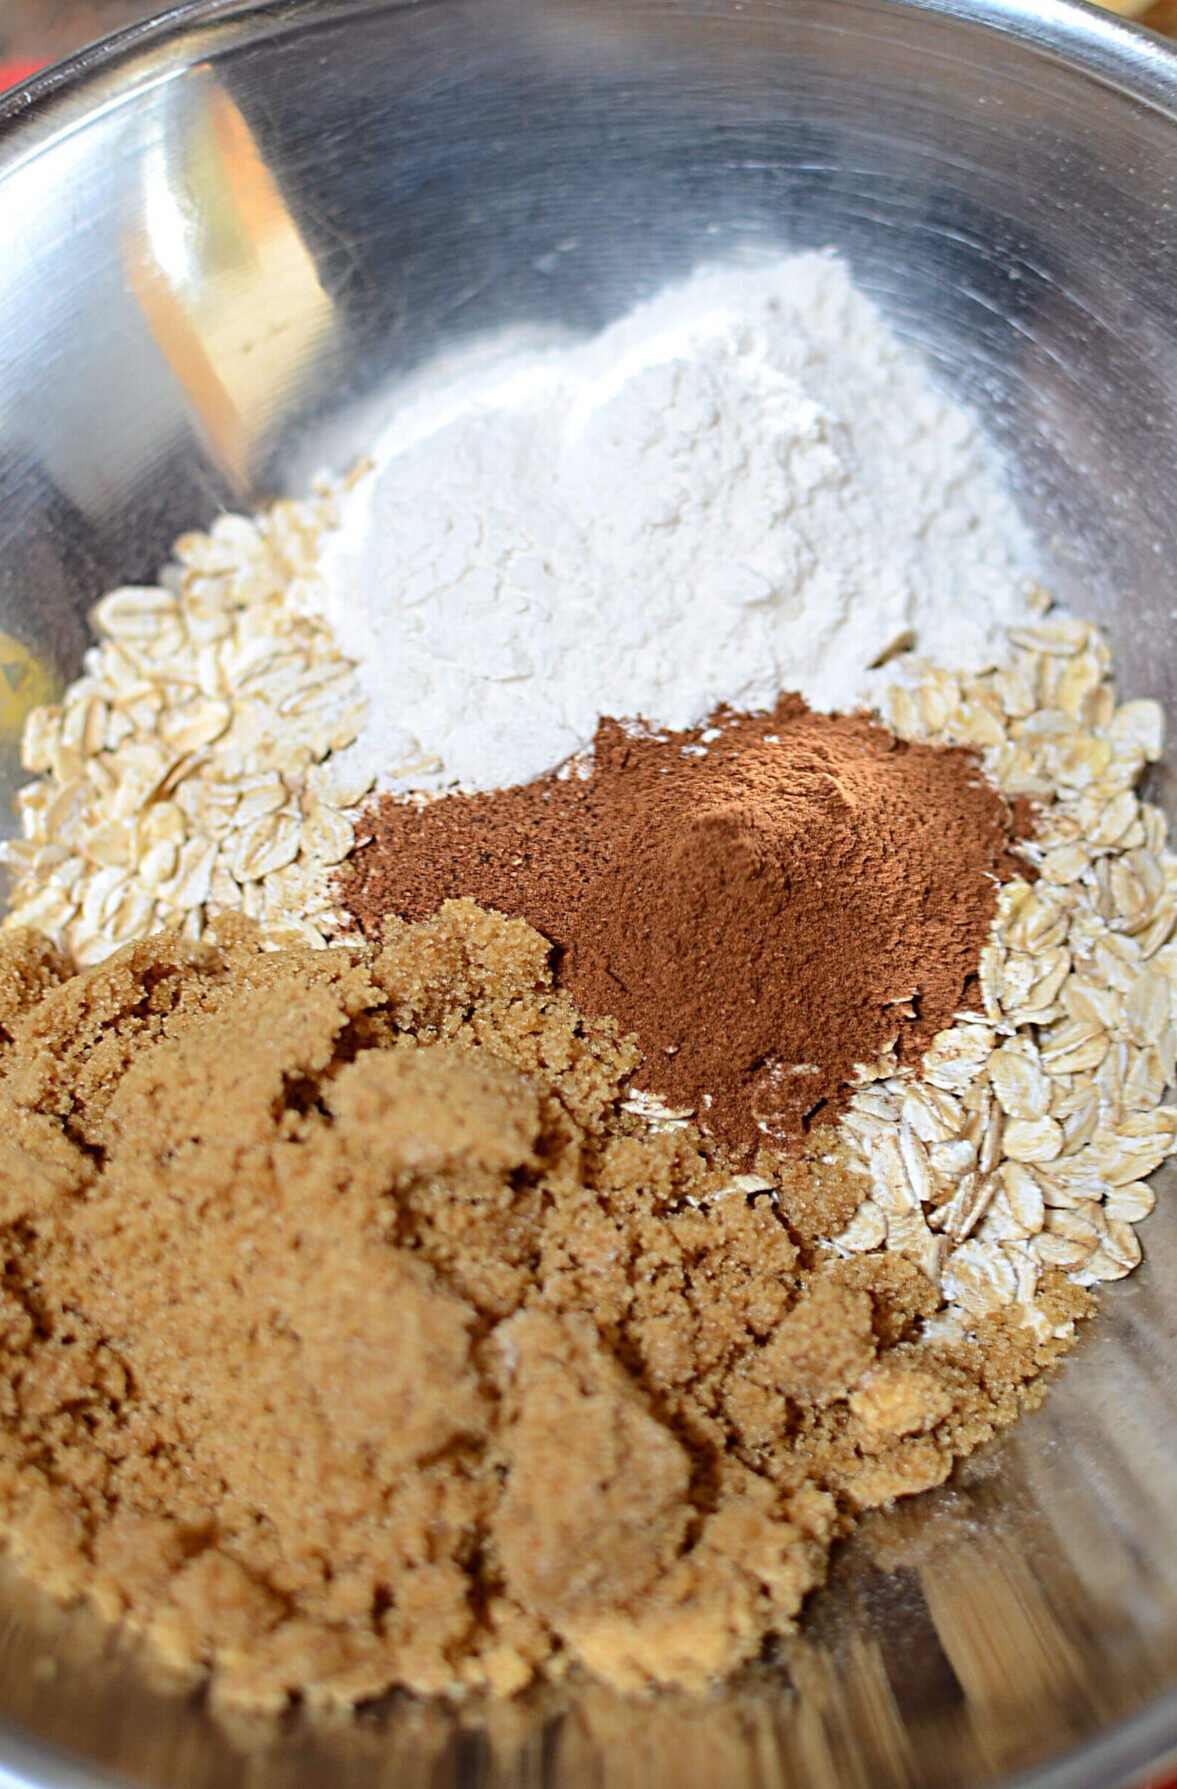 The topping ingredients in a silver bowl. Oats, flour, cinnamon, nutmeg and brown sugar.